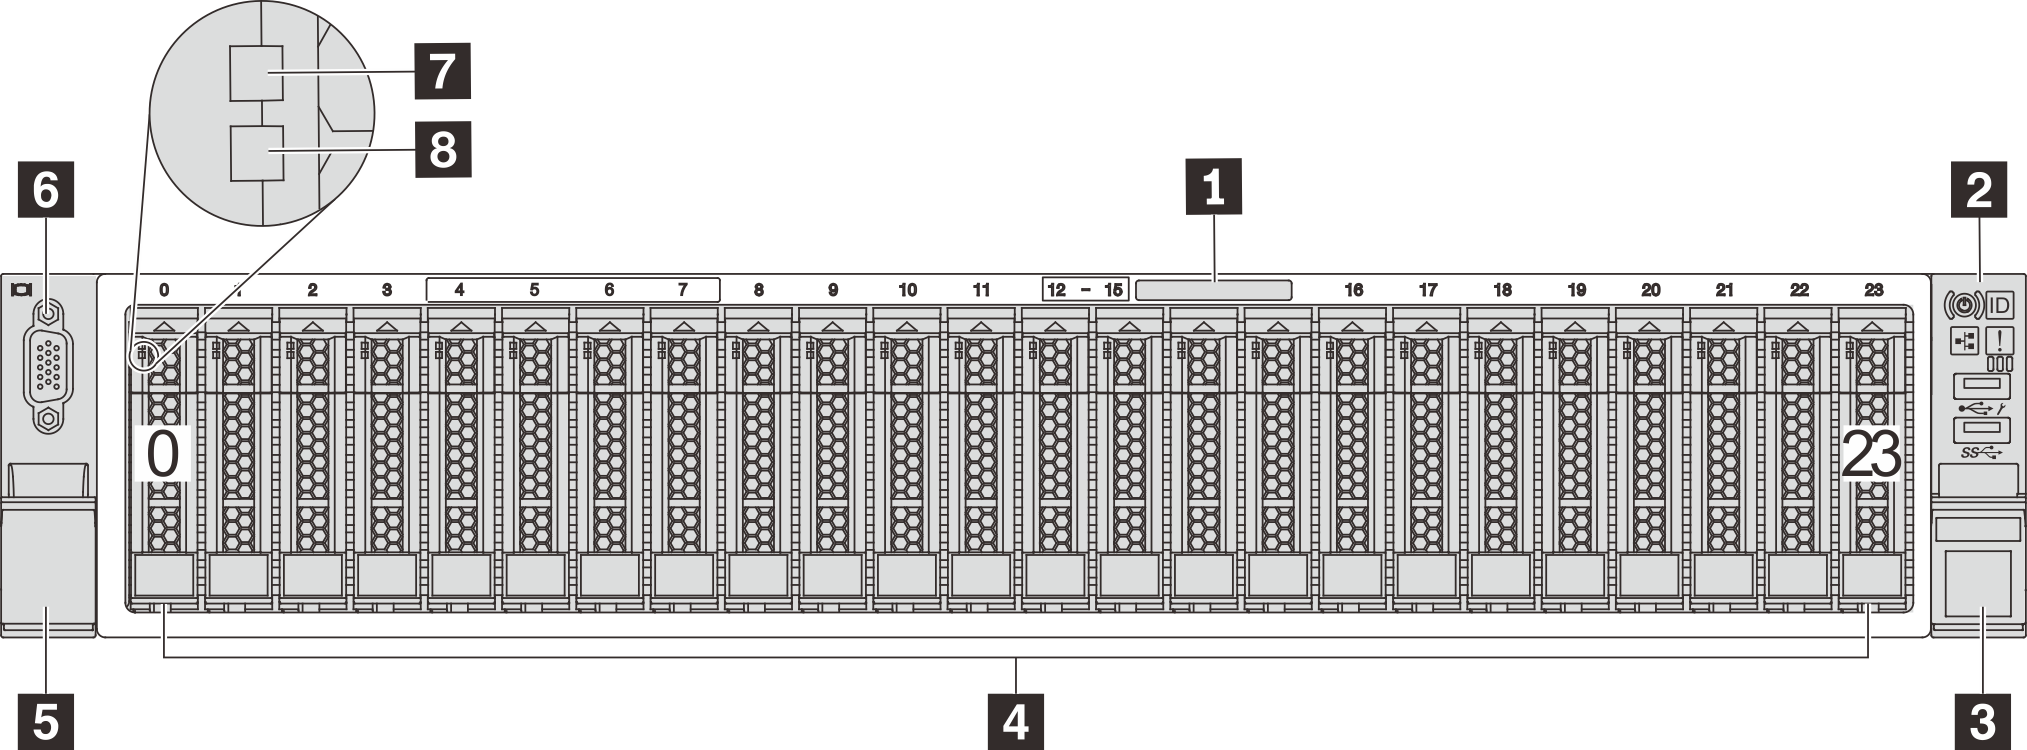 Front view of server models with twenty-four 2.5-inch drive bays (0–23)